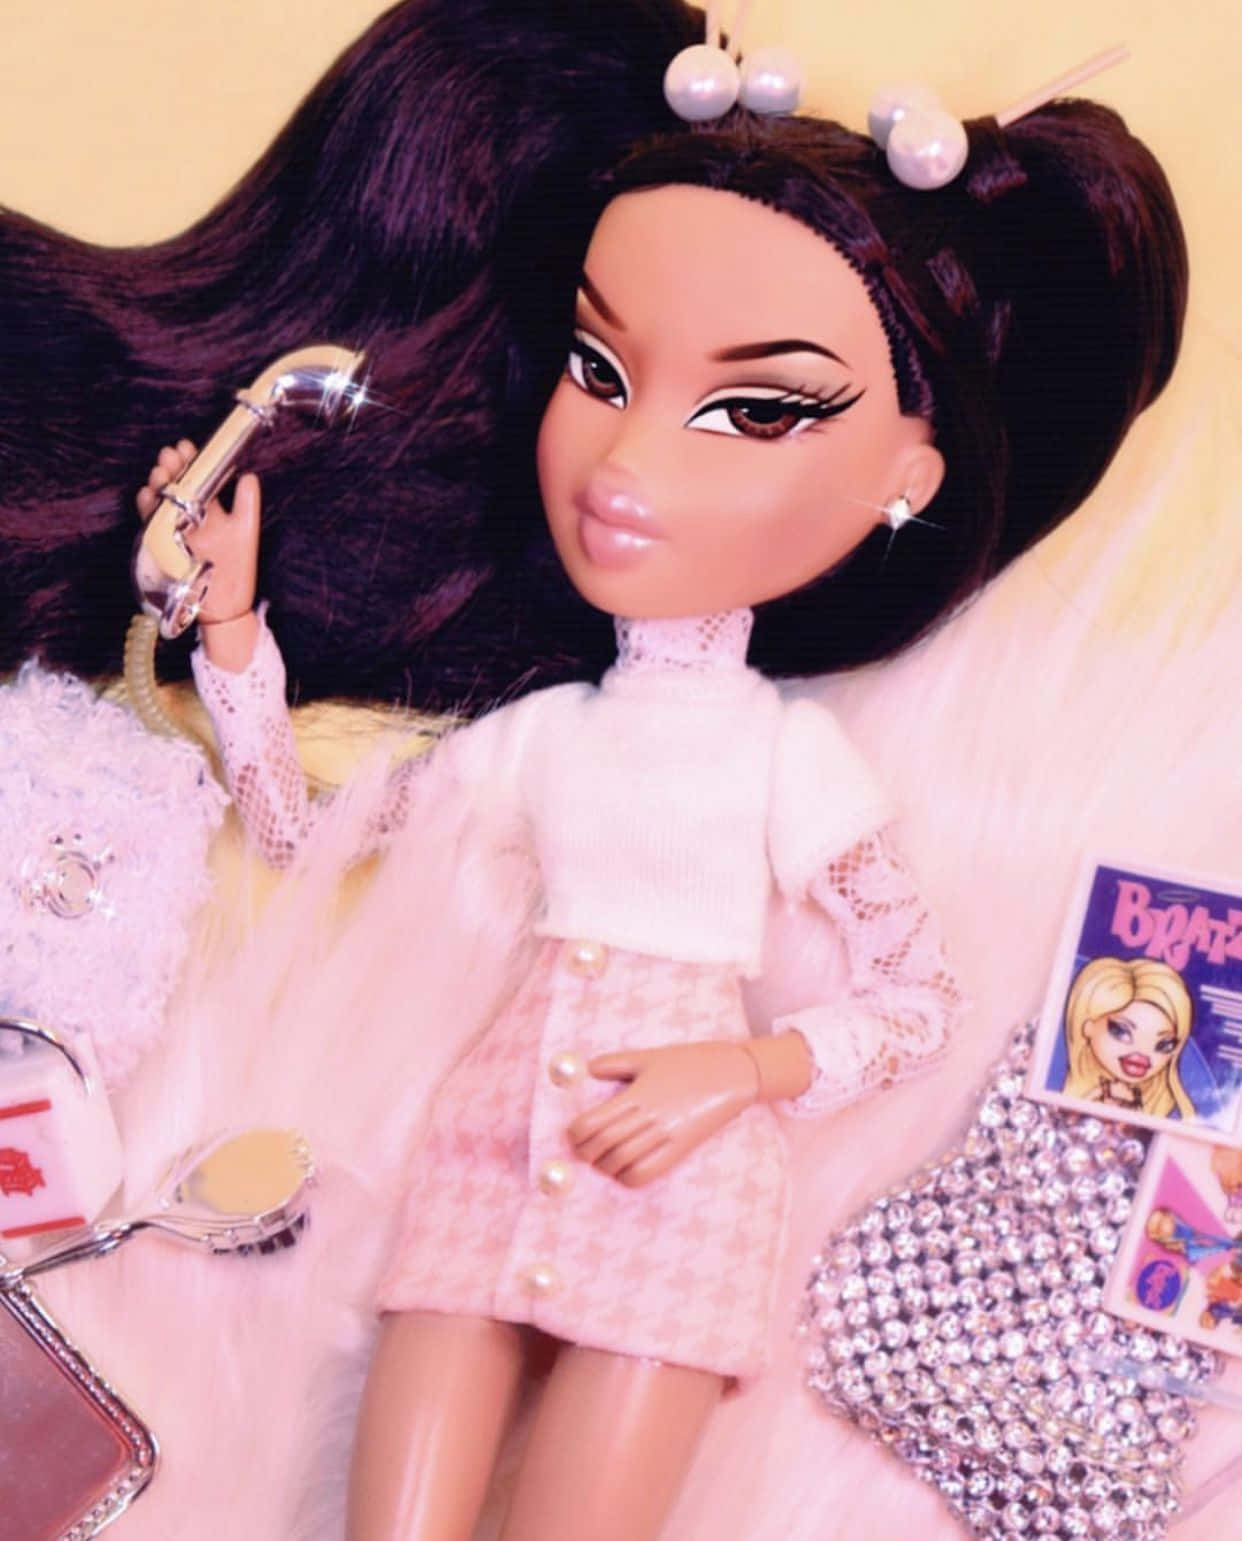 Download Be Rhythmic and Trendy as a Bratz Doll in 2020 Wallpaper